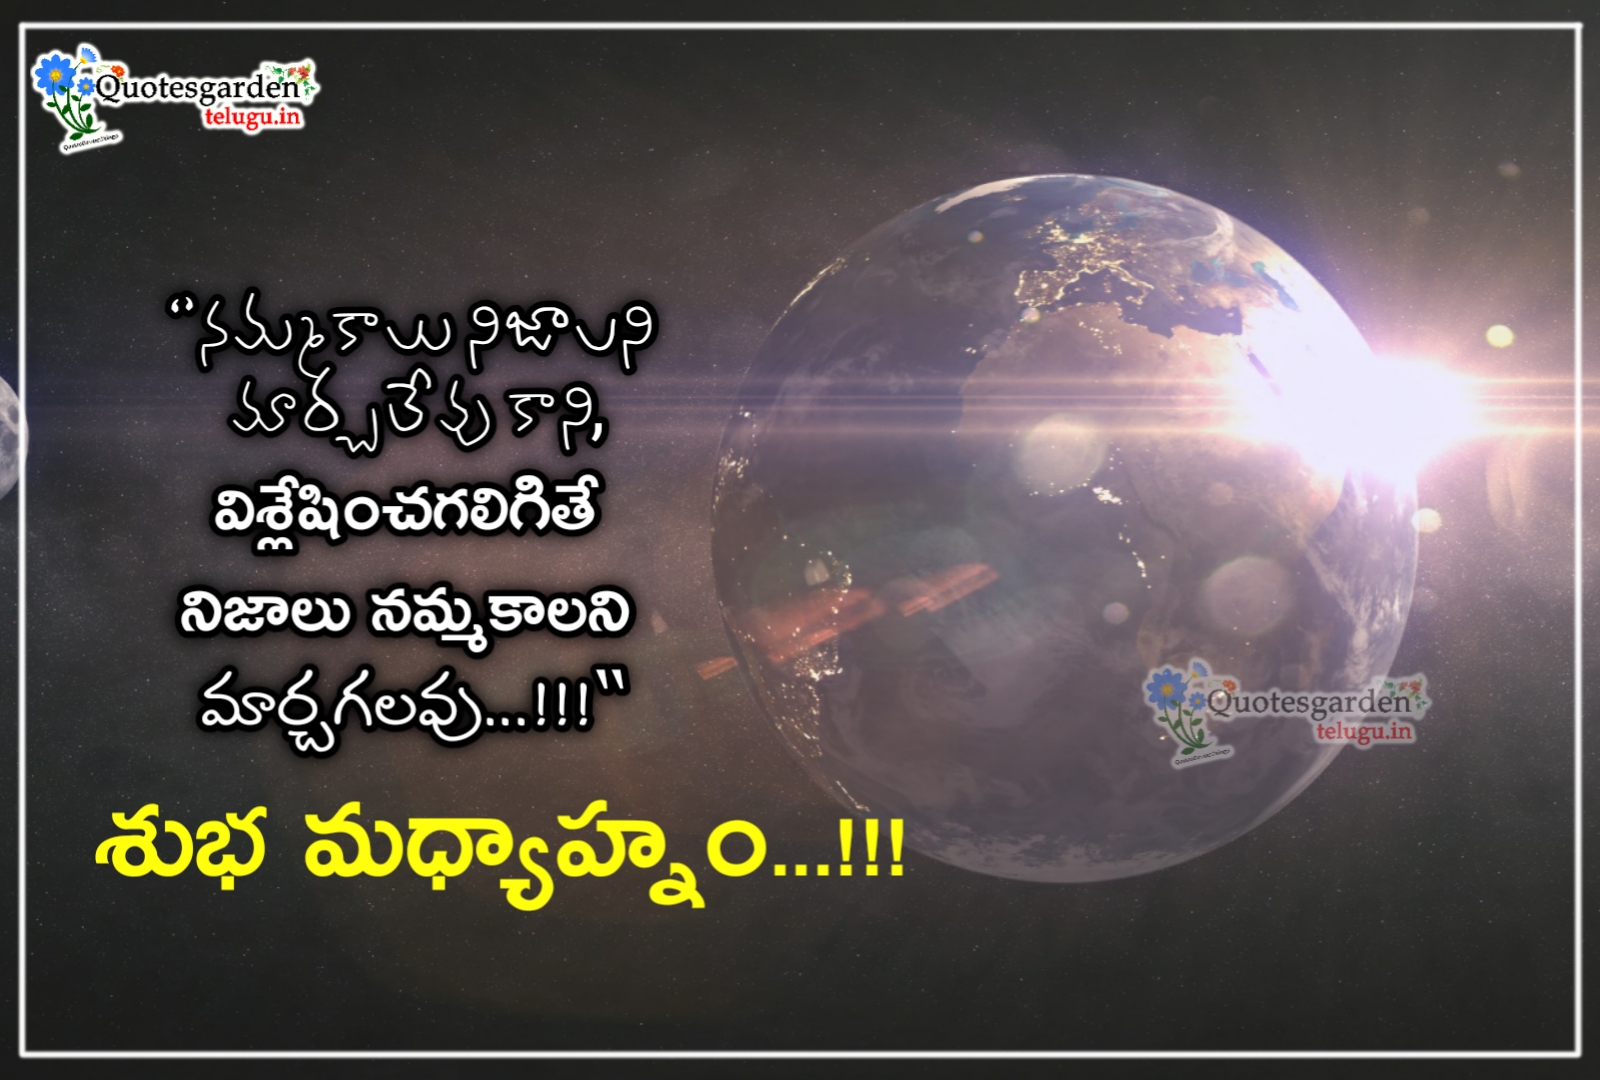 Good Afternoon Quotes Wishes in Telugu | QUOTES GARDEN TELUGU ...